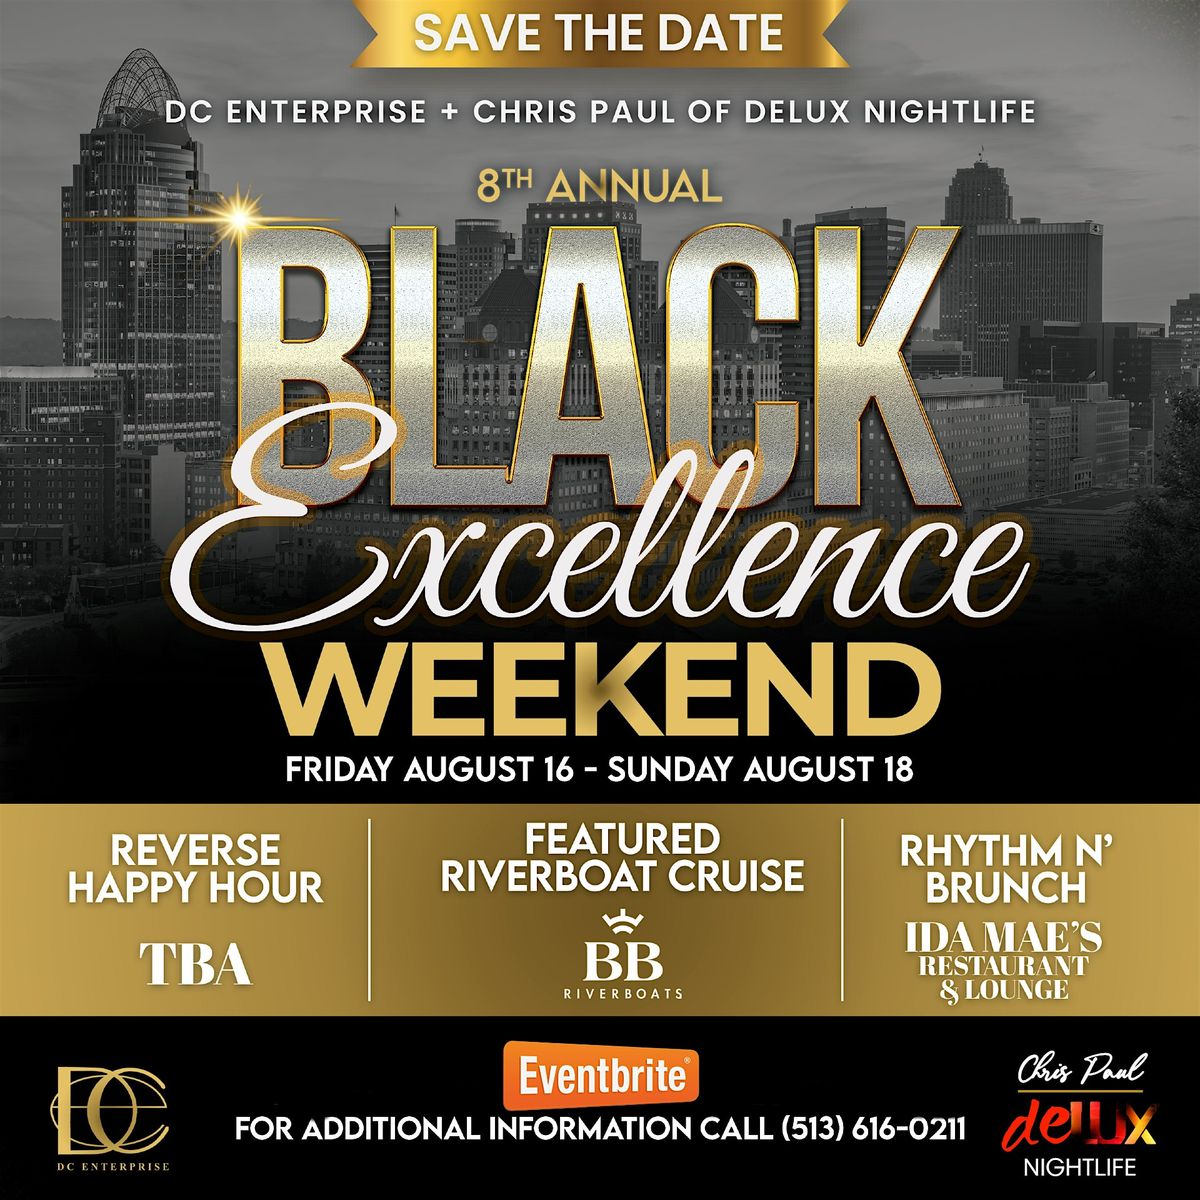 The 8th BLACK EXCELLENCE Weekend (Aug 16 - Aug 18)